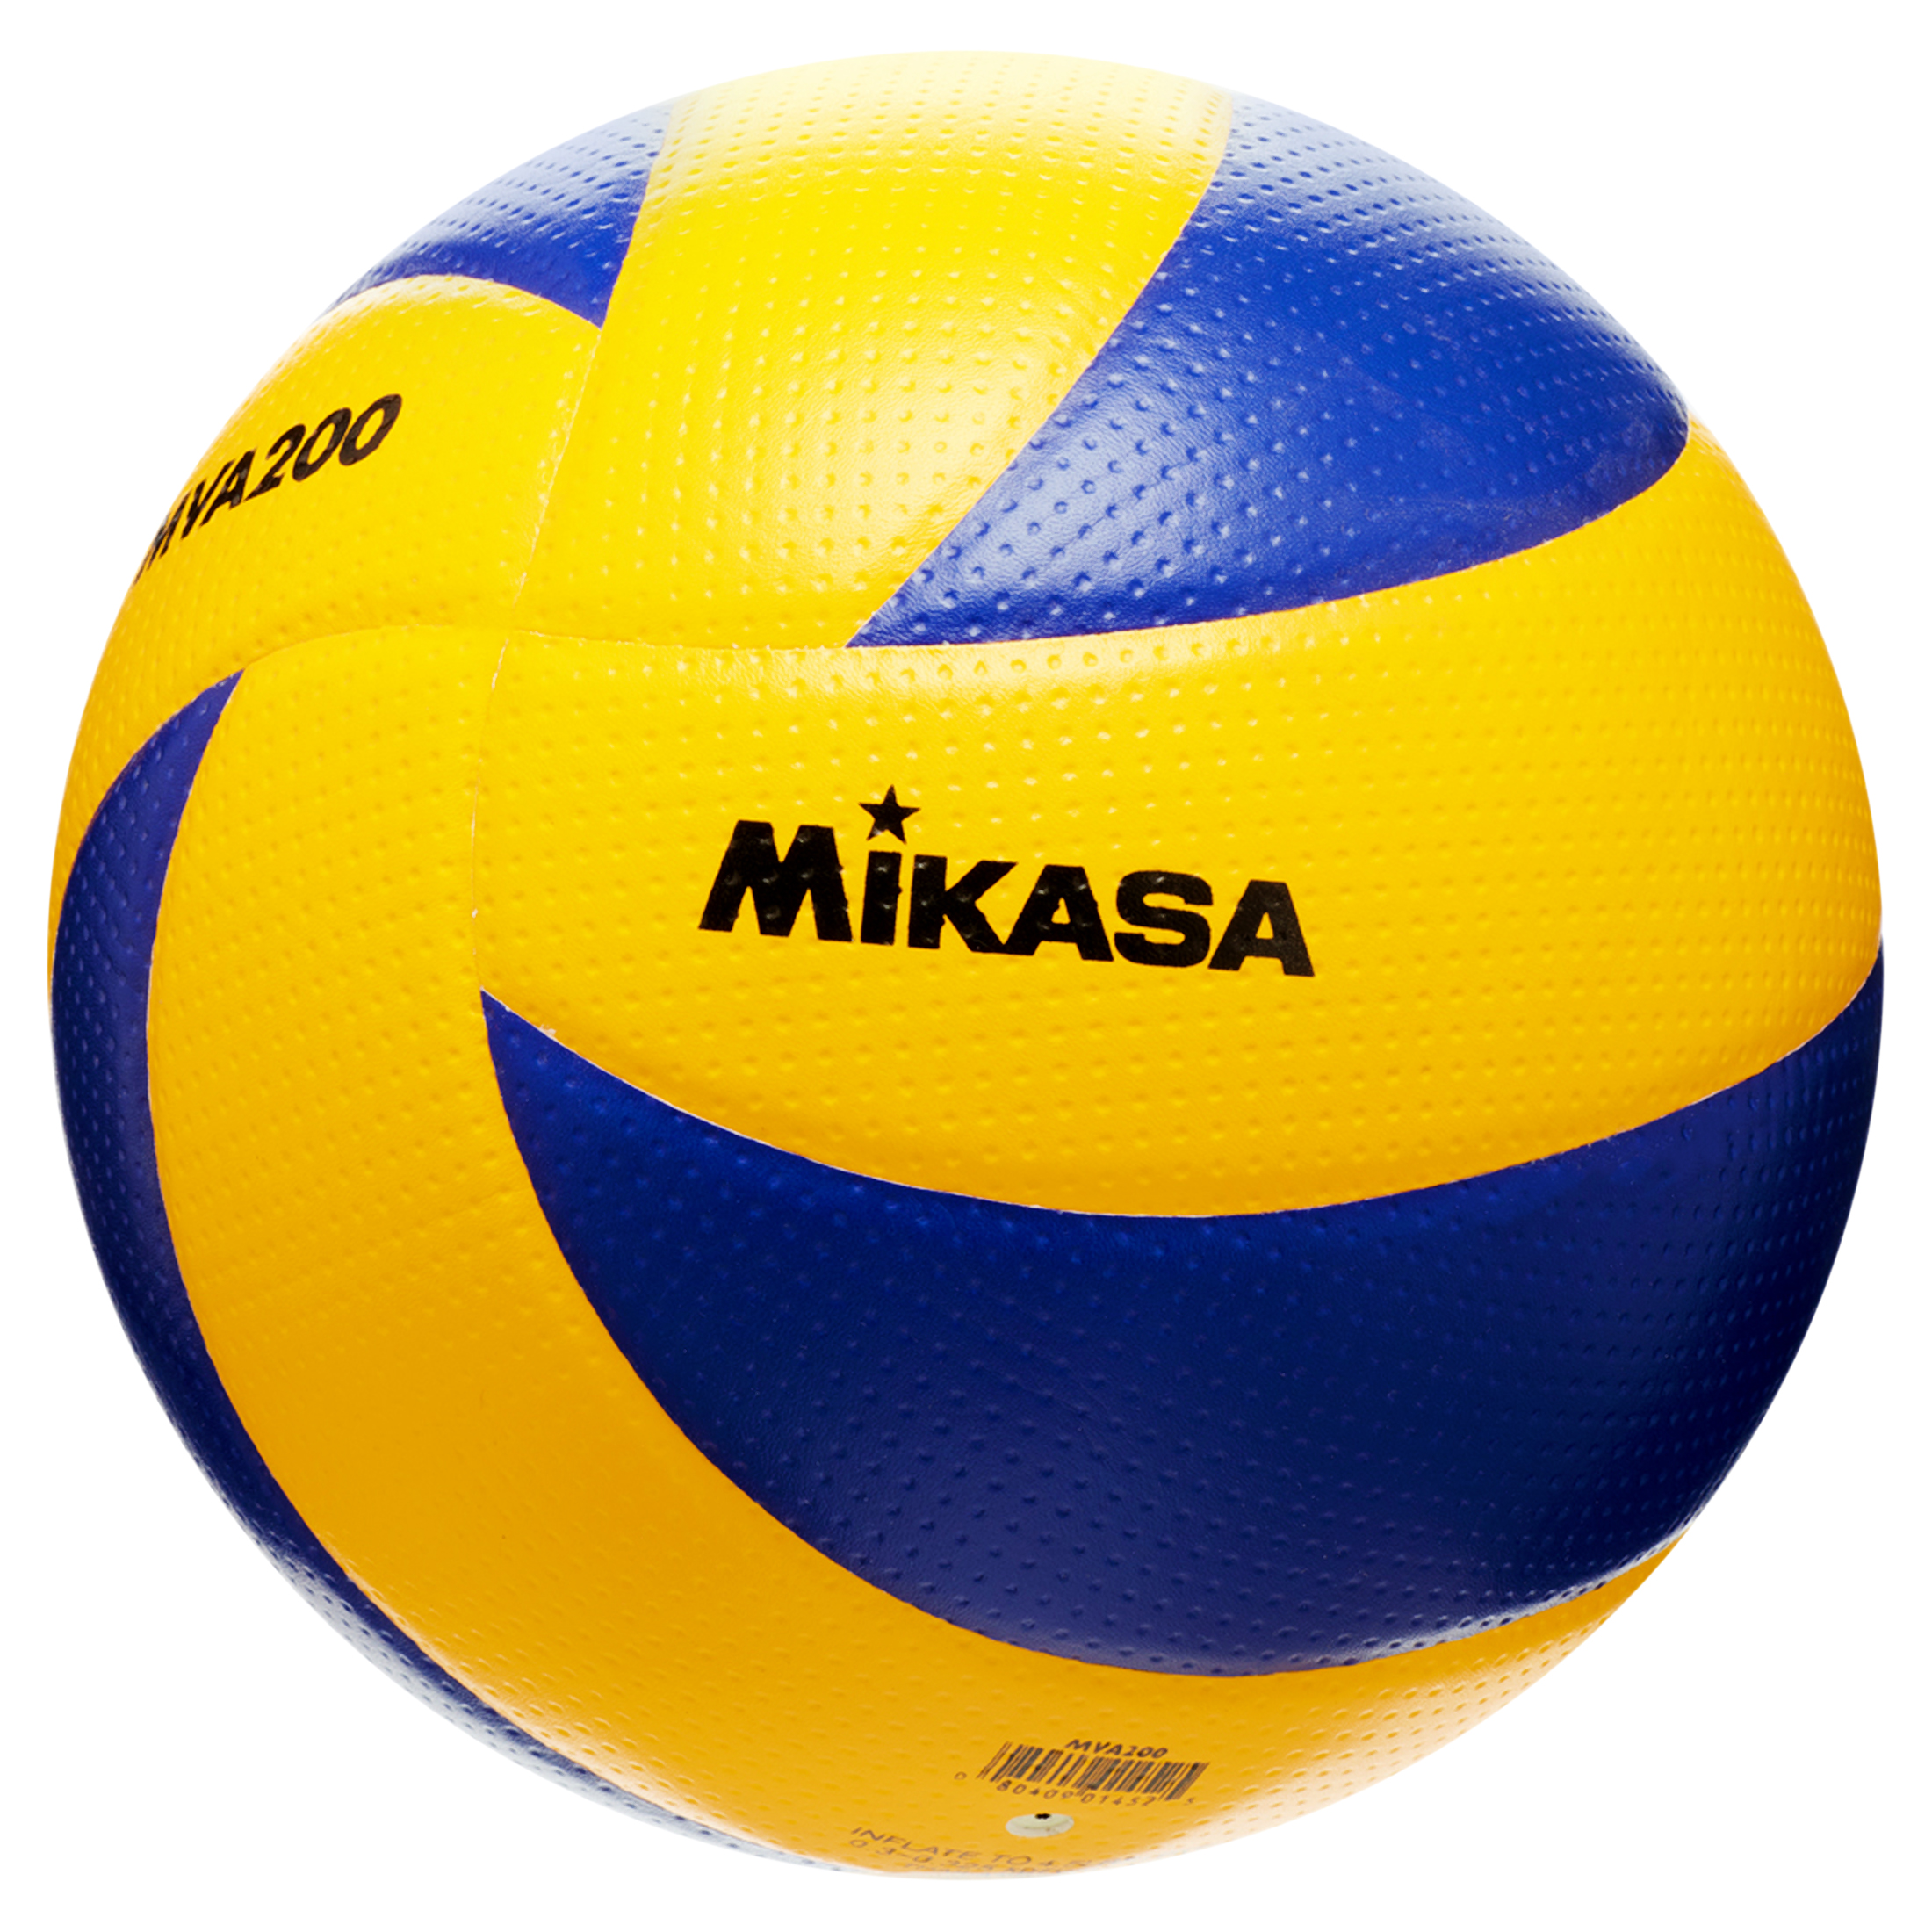 Mikasa MVA200 Official FIVB Game Volleyball, Blue and Yellow - Walmart.com